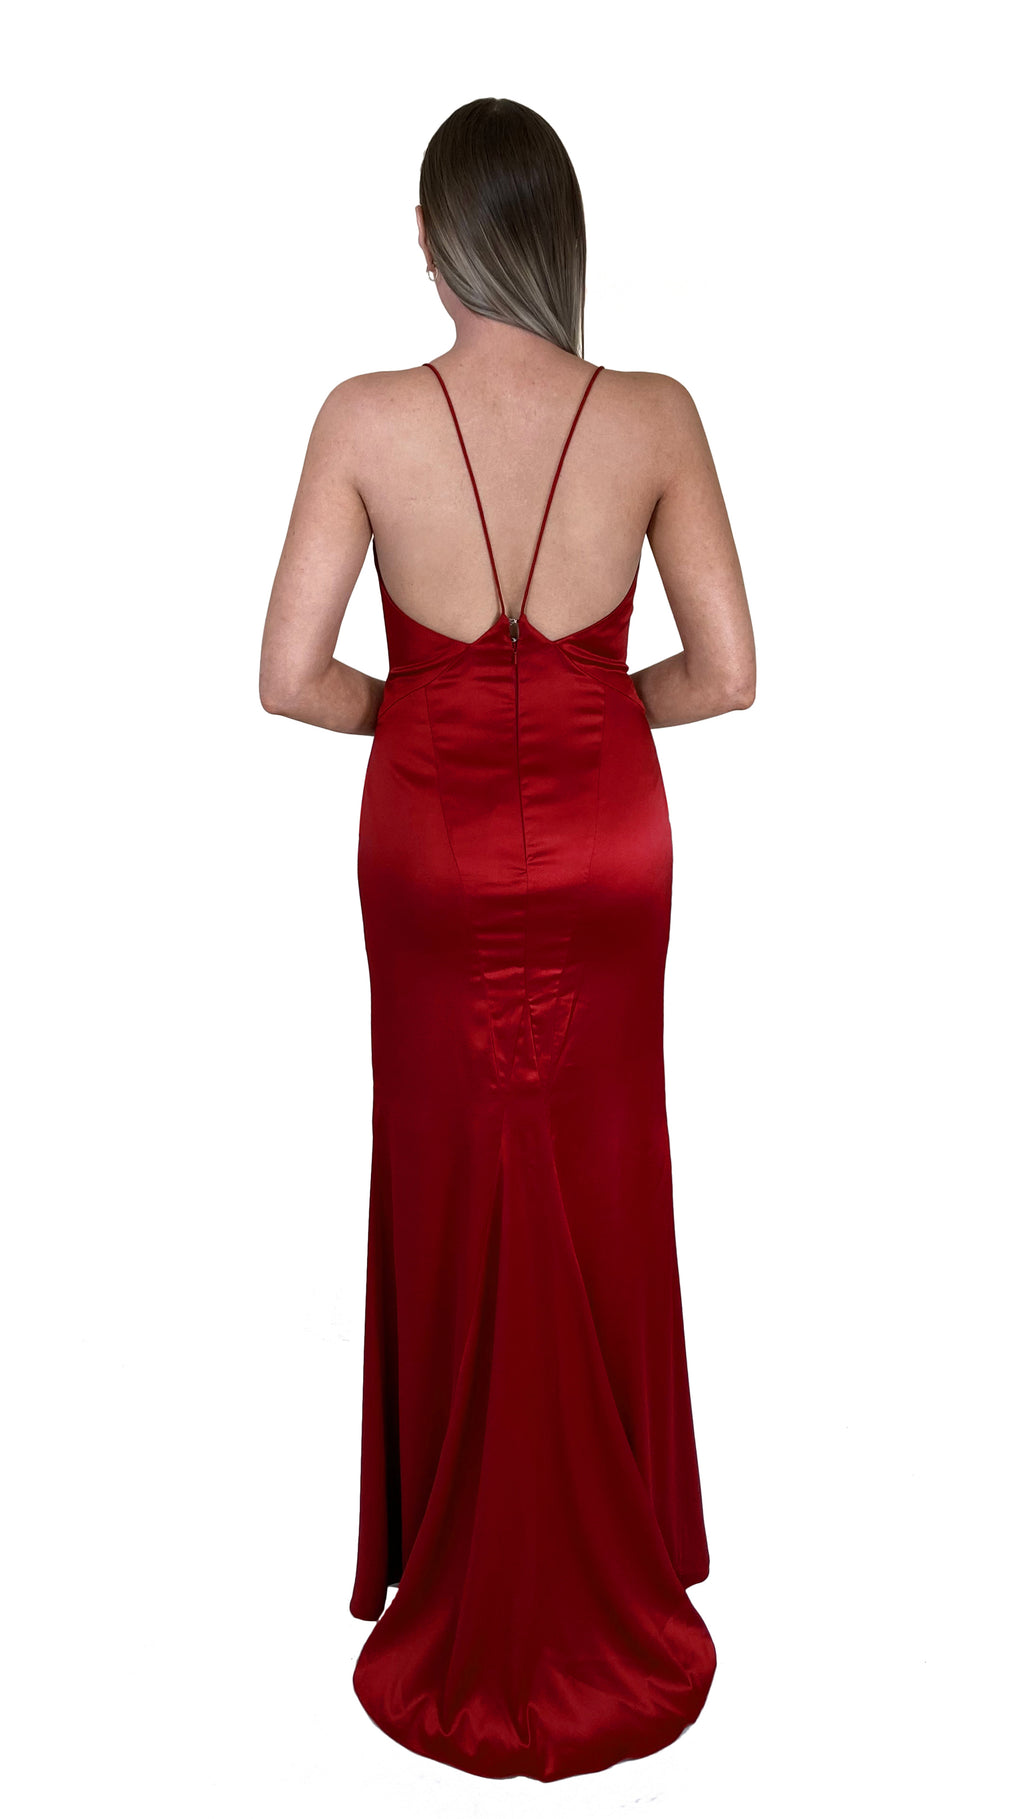 Bariano Nora V Neck Red Satin Gown back